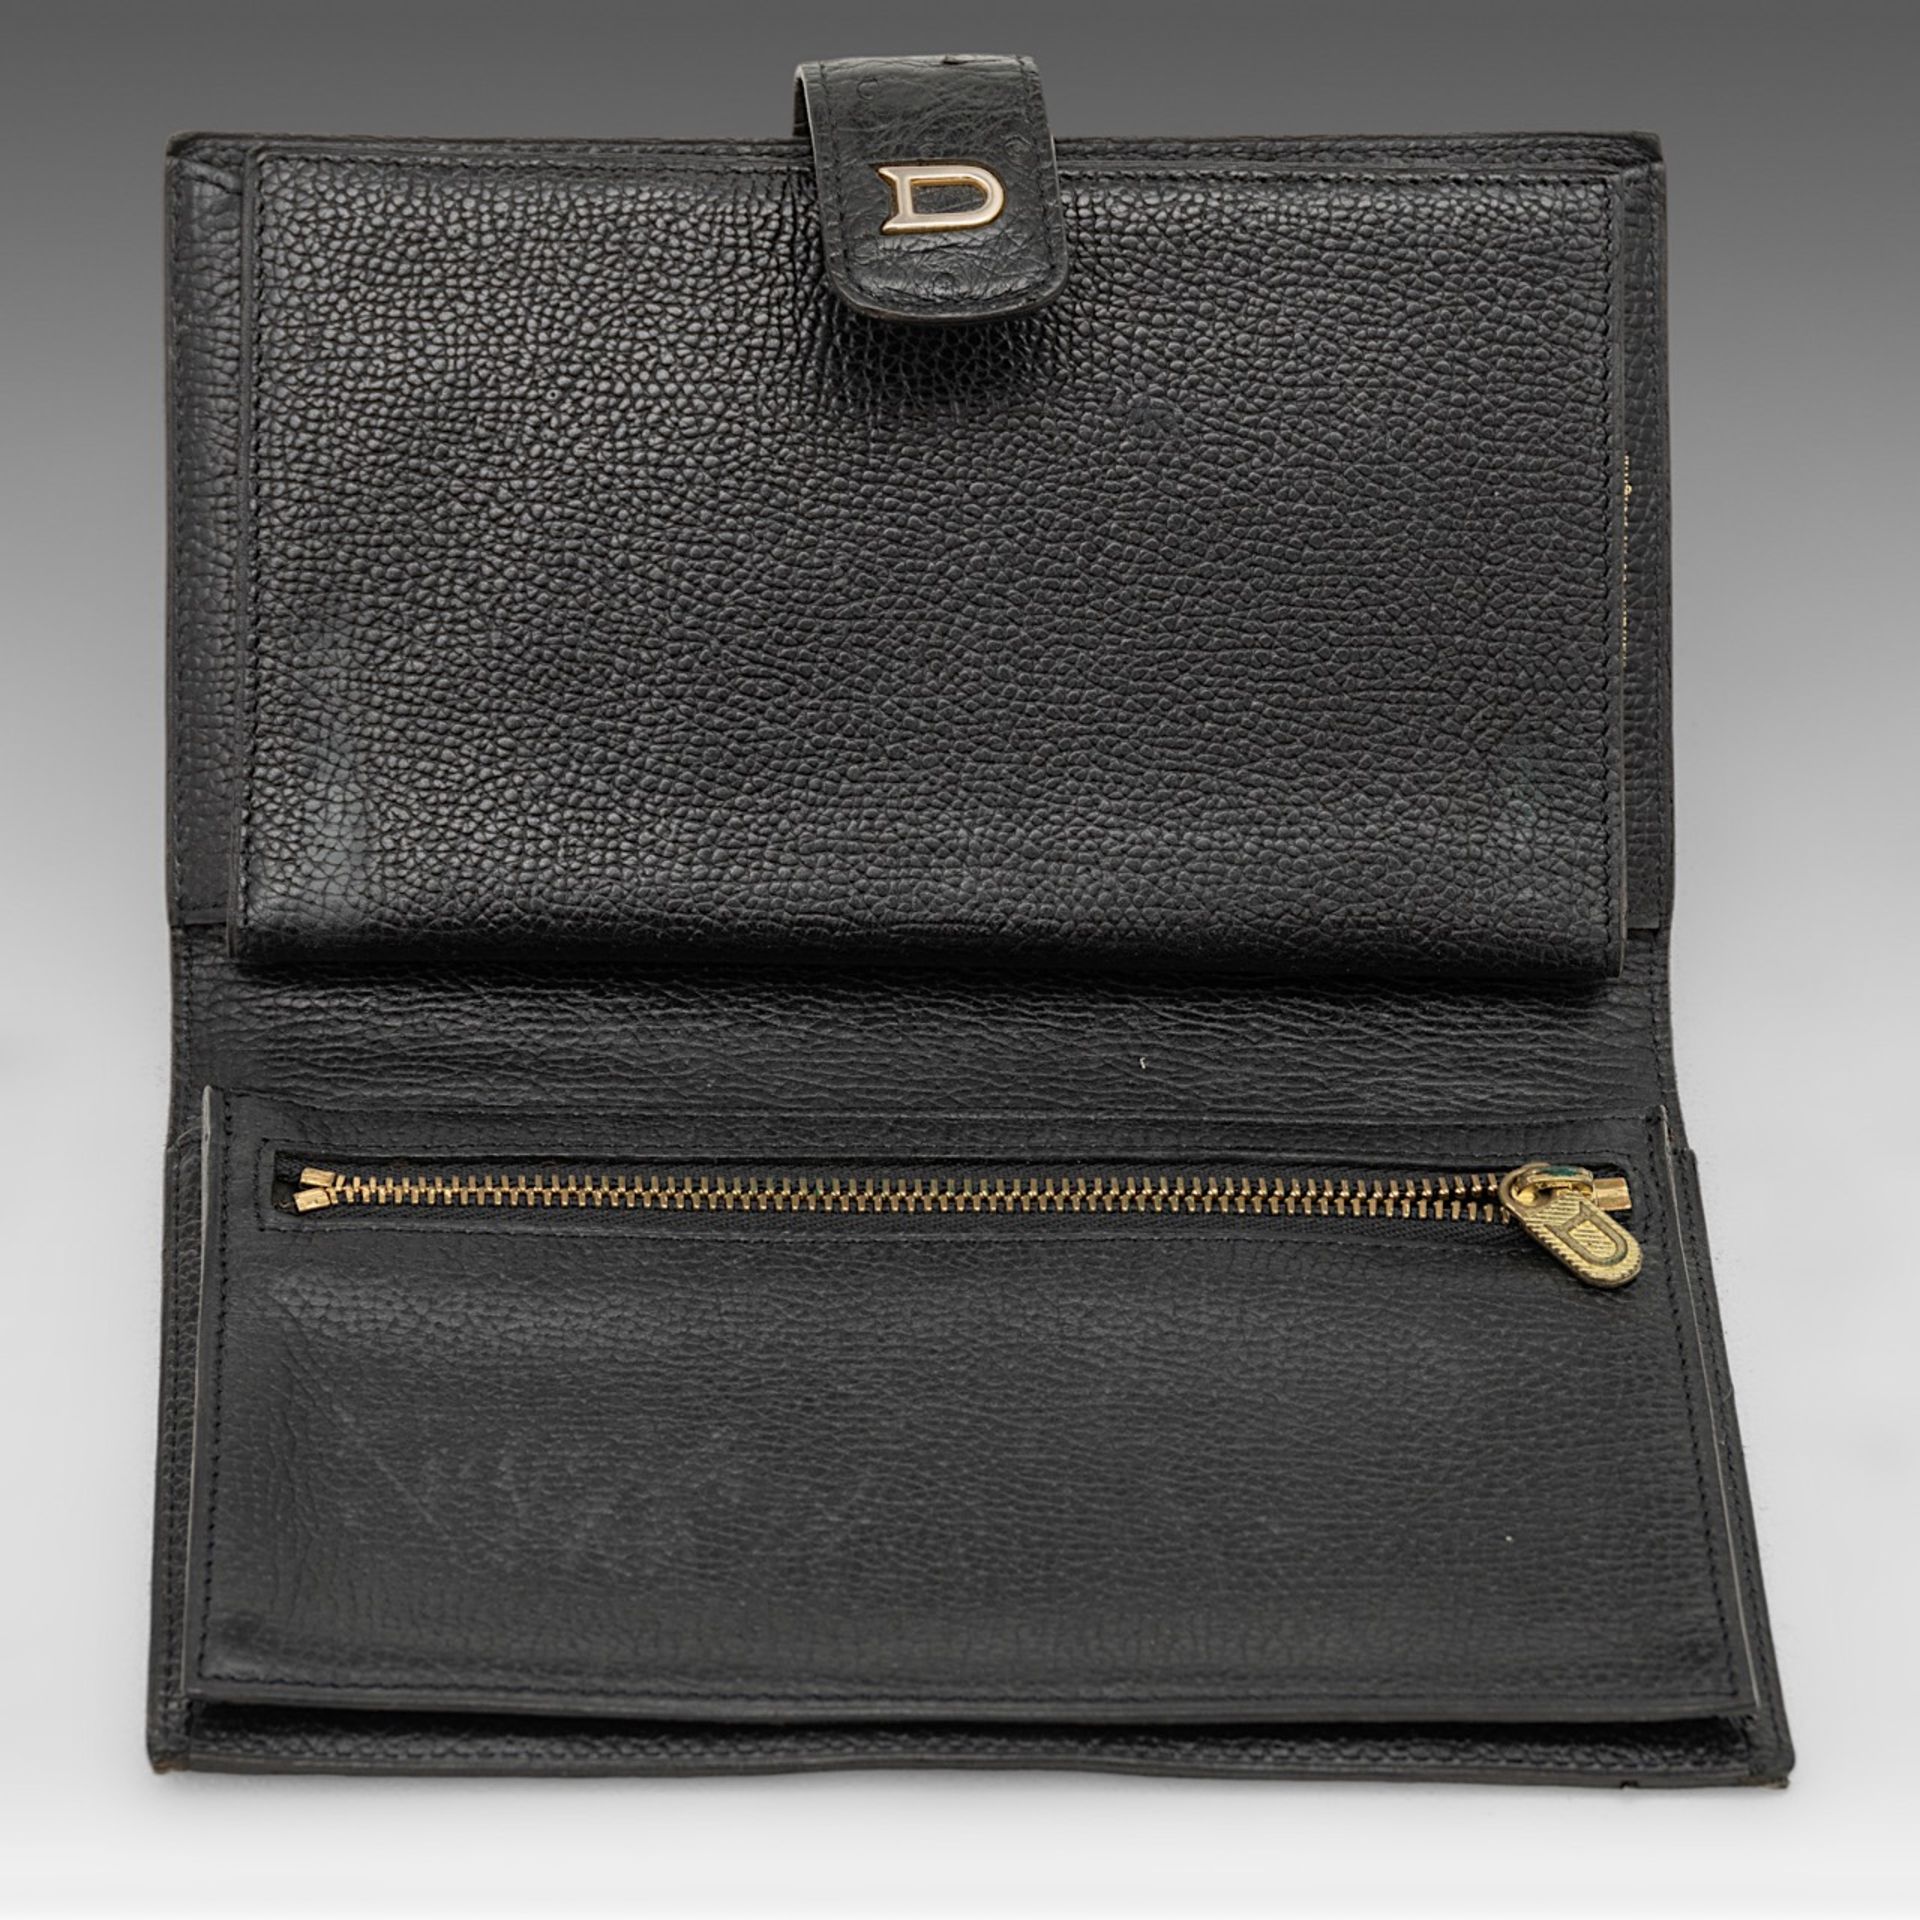 A matching collection of a Delvaux shoulder bag, a clutch and a wallet in black ostrich leather. - Image 15 of 16